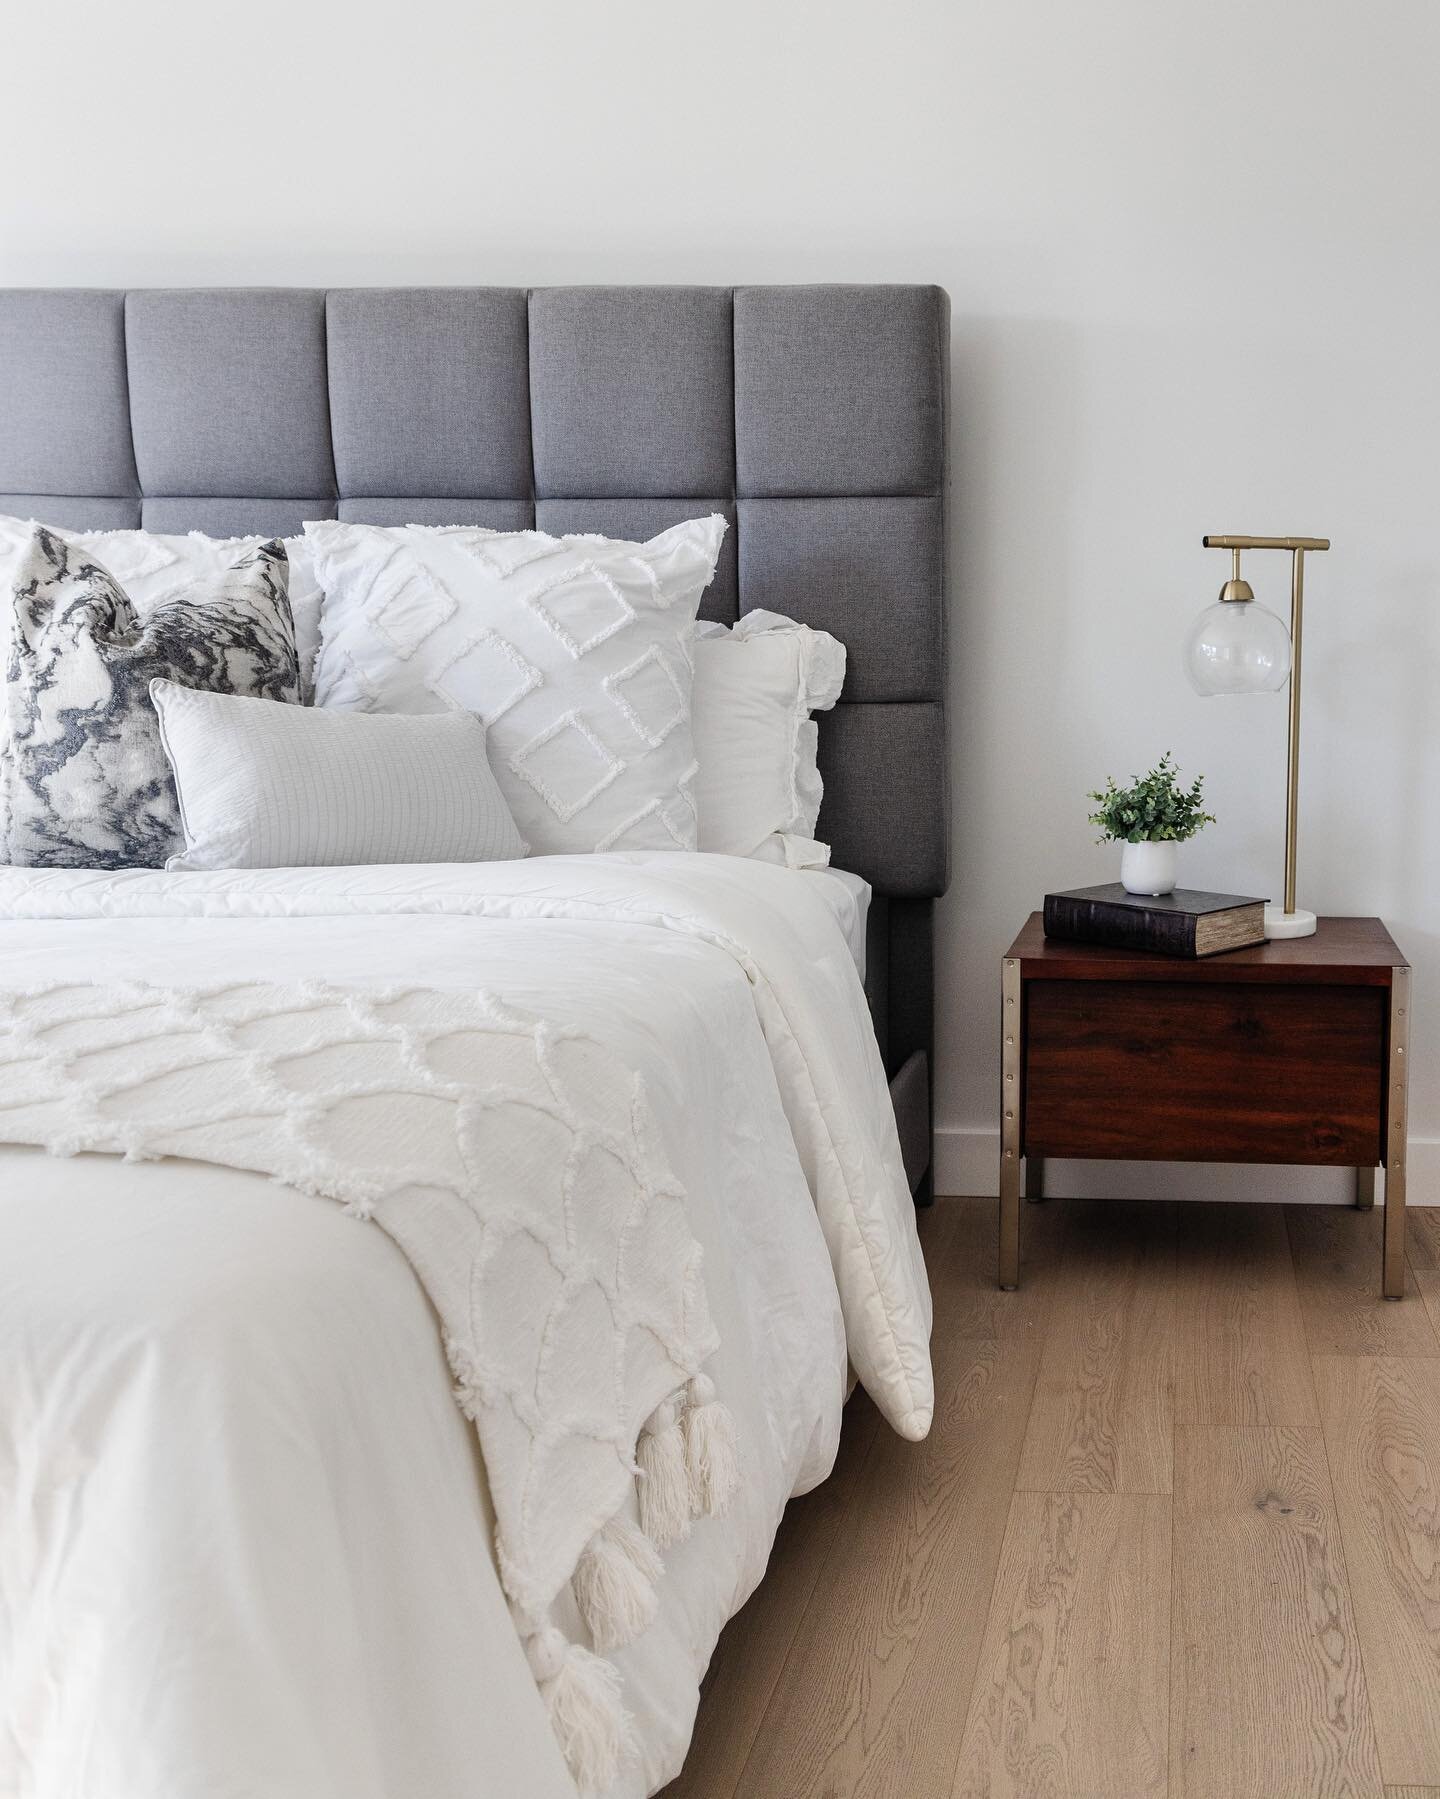 We love getting asked for our Avenue One opinion on styling a bedroom with nightstands!! 

The nightstand plays the second largest role (we like to say the bed is the first) it adds storage and function, and brings a new element to the space. We love